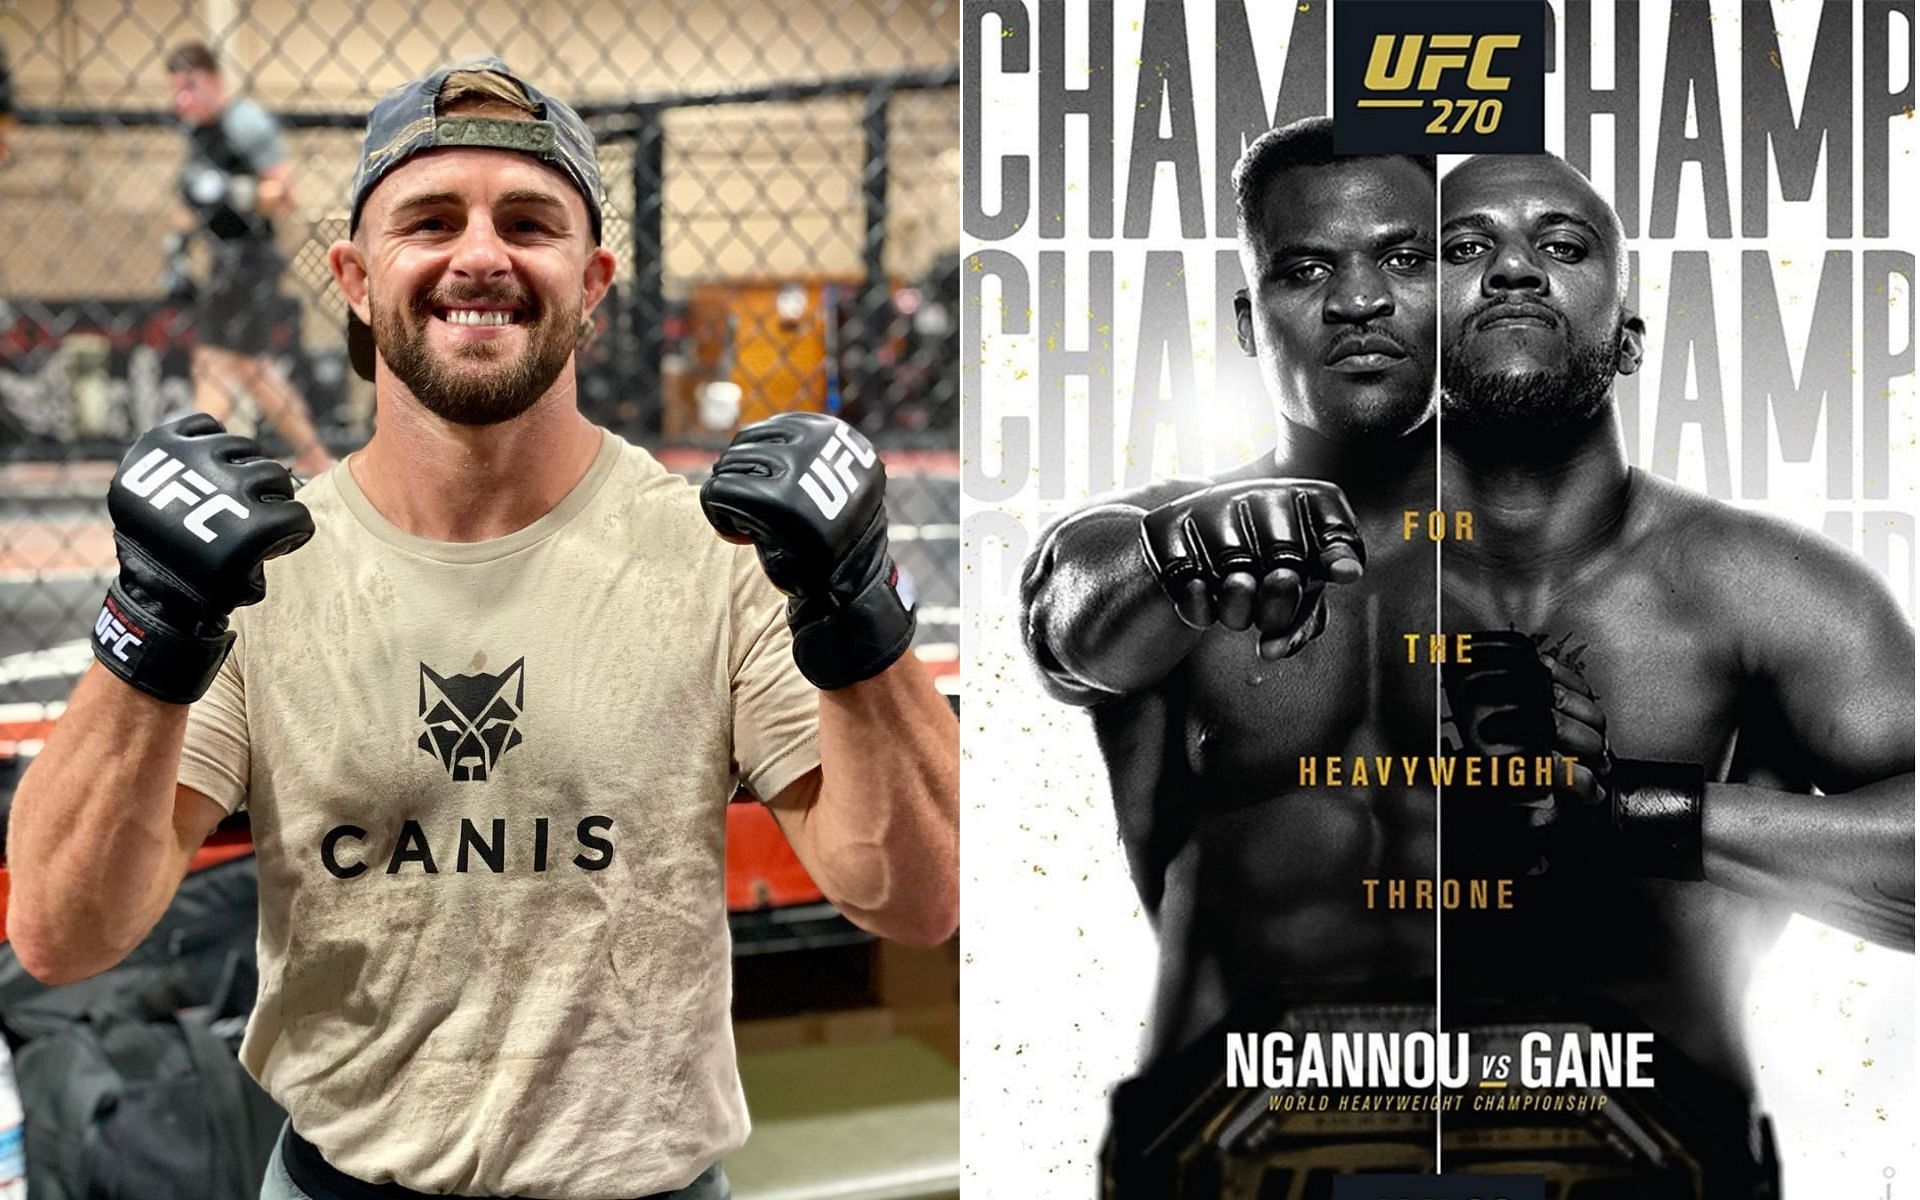 Cody Stamann (left) and Francis Ngannou vs Ciryl Gane (right) [Image credits: @ufc and @codystamann on Instagram]